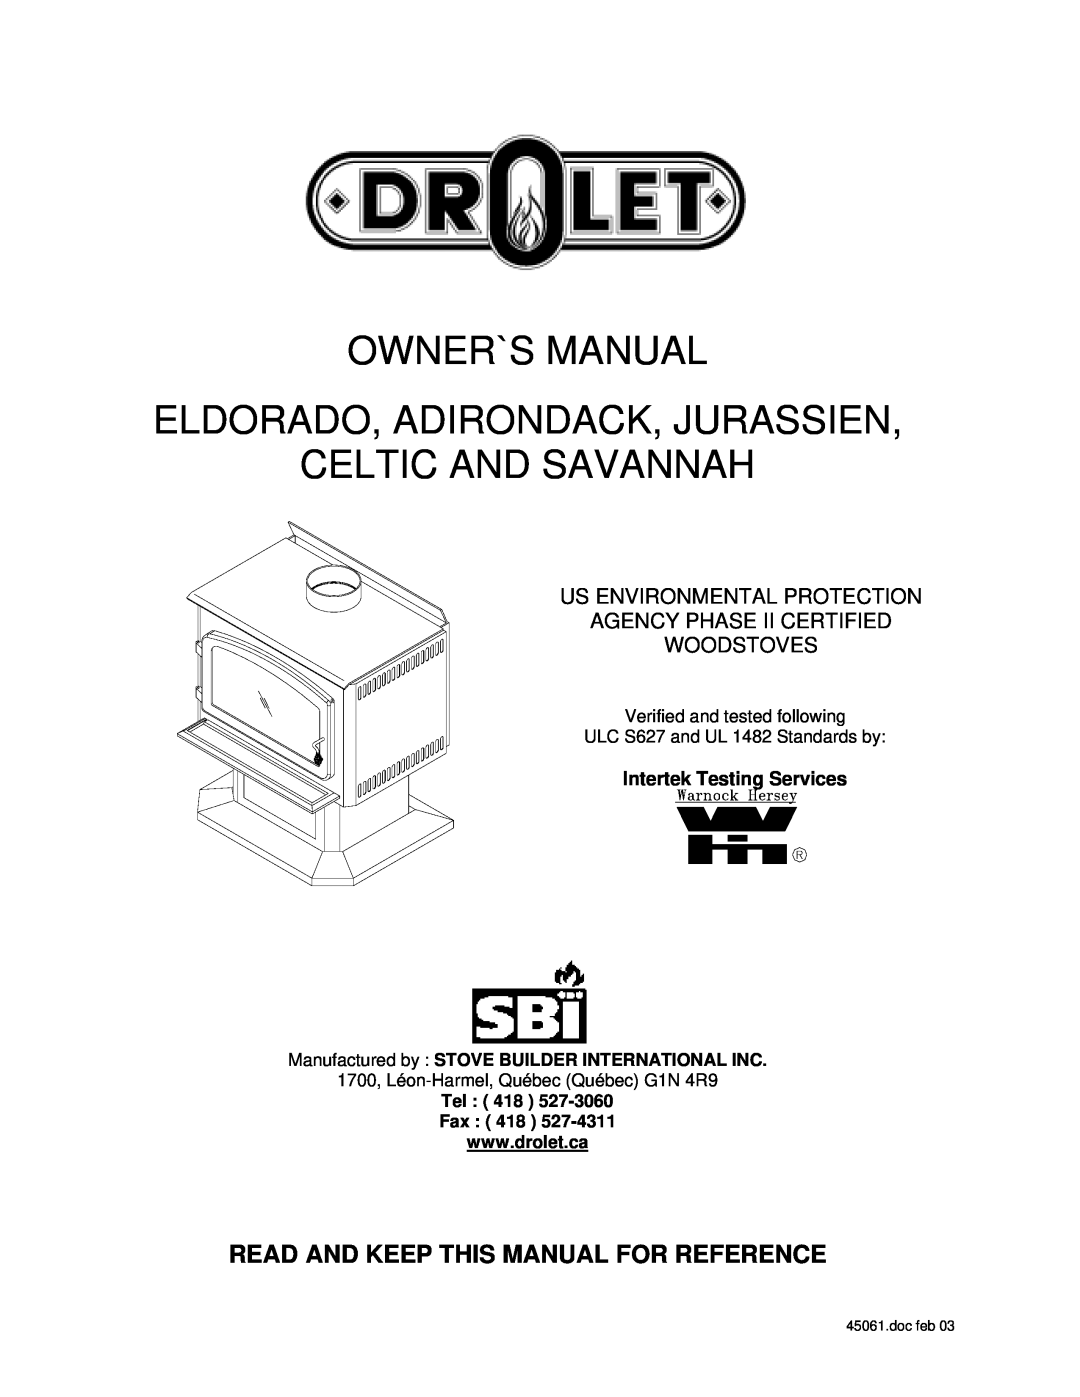 Drolet owner manual Read And Keep This Manual For Reference, Owner`S Manual Eldorado, Adirondack, Jurassien, doc feb 